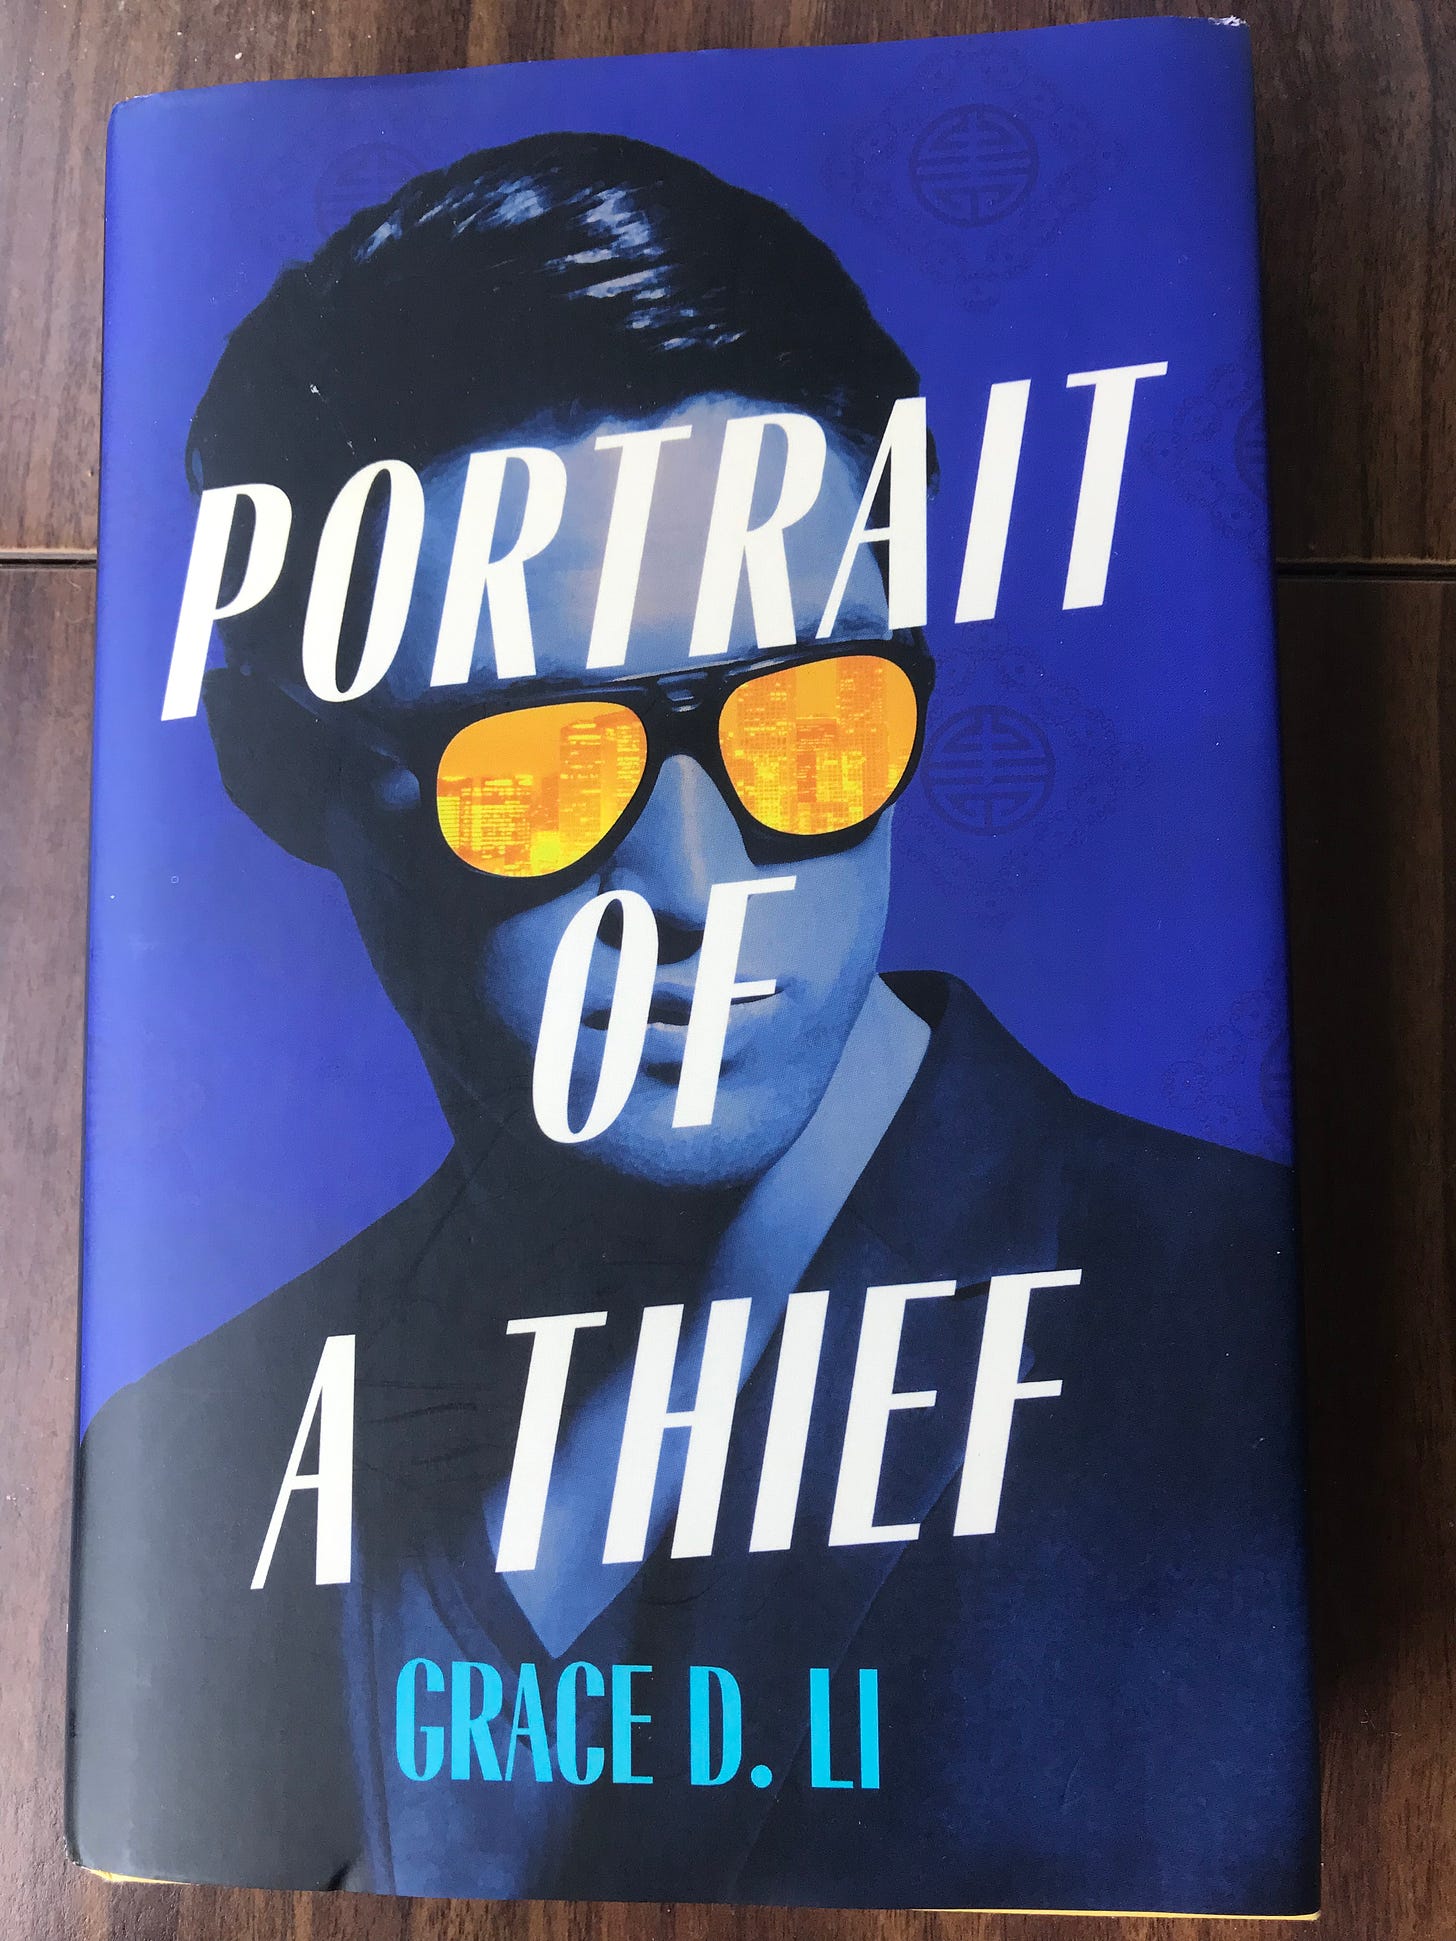 A book on a wooden table. The book cover is electric blue, with the title "Portrait of a Thief" in white capital letters slanted slightly upward to the right, superimposed on an image of a man in a suit jacket and tshirt, and black hair slicked back wearing sunglasses with bright yellow lenses with city buildings in the reflection.